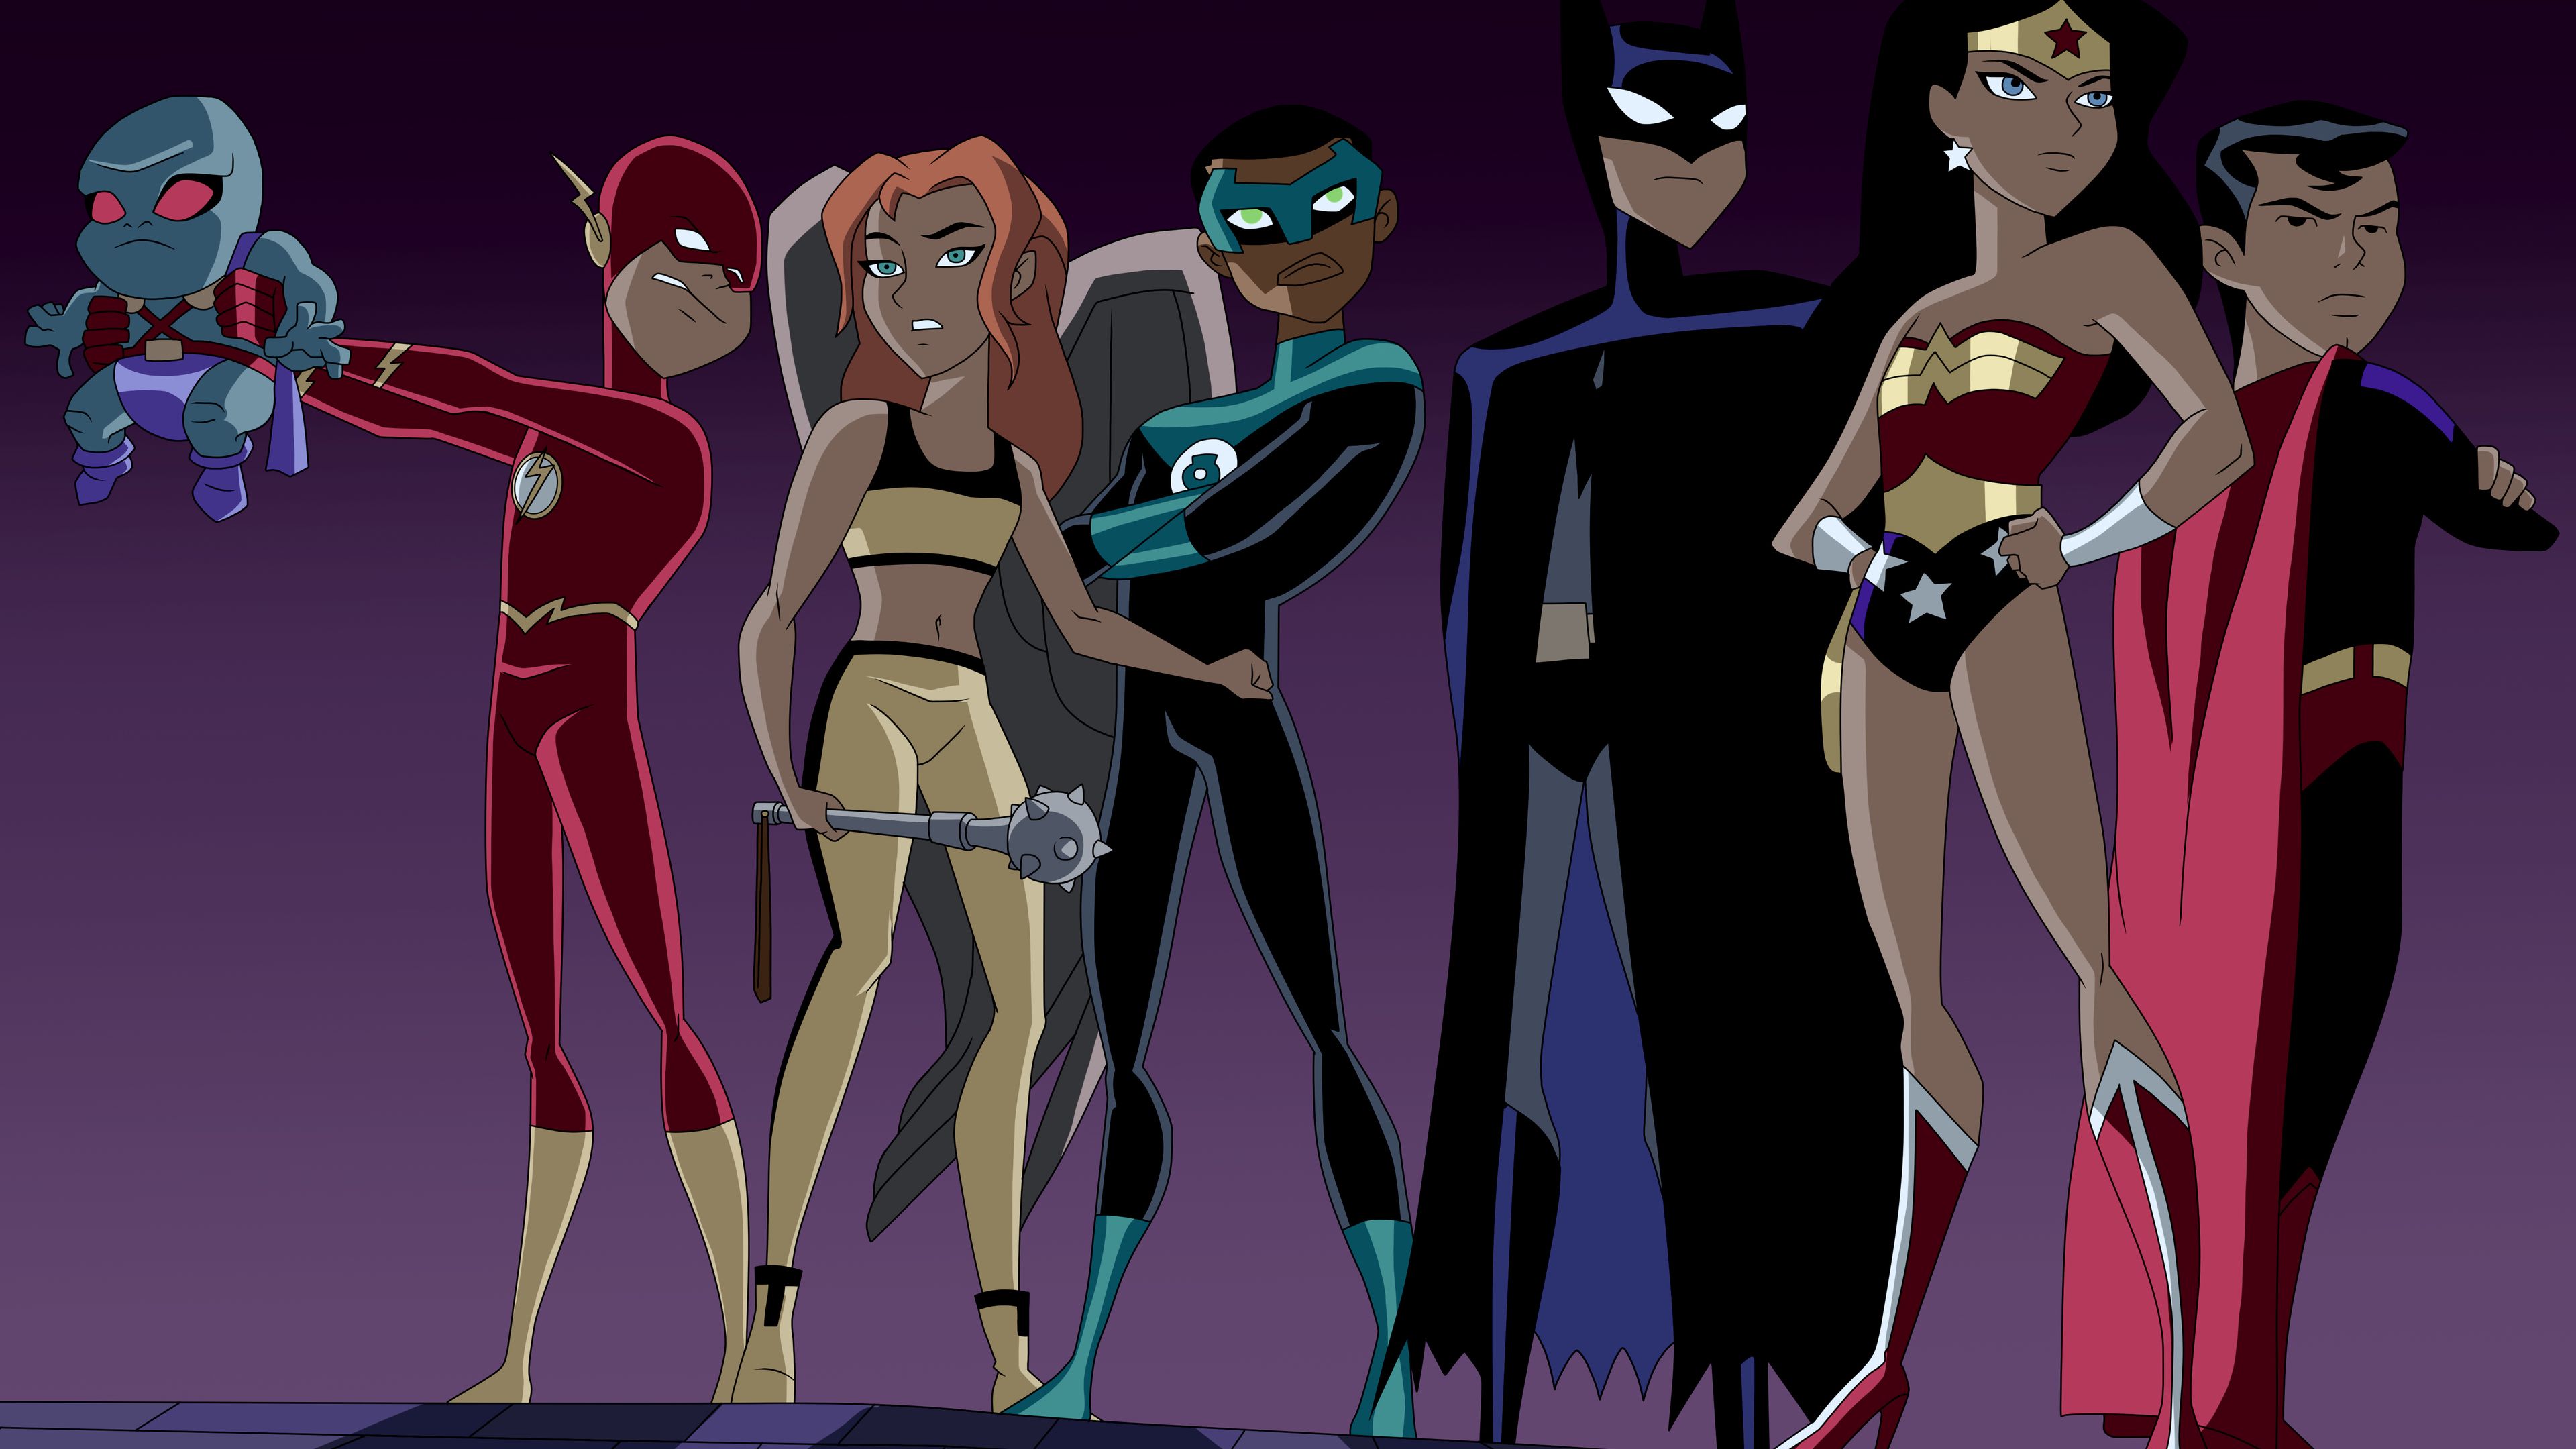 Justice League Unlimited Art by glee-chan